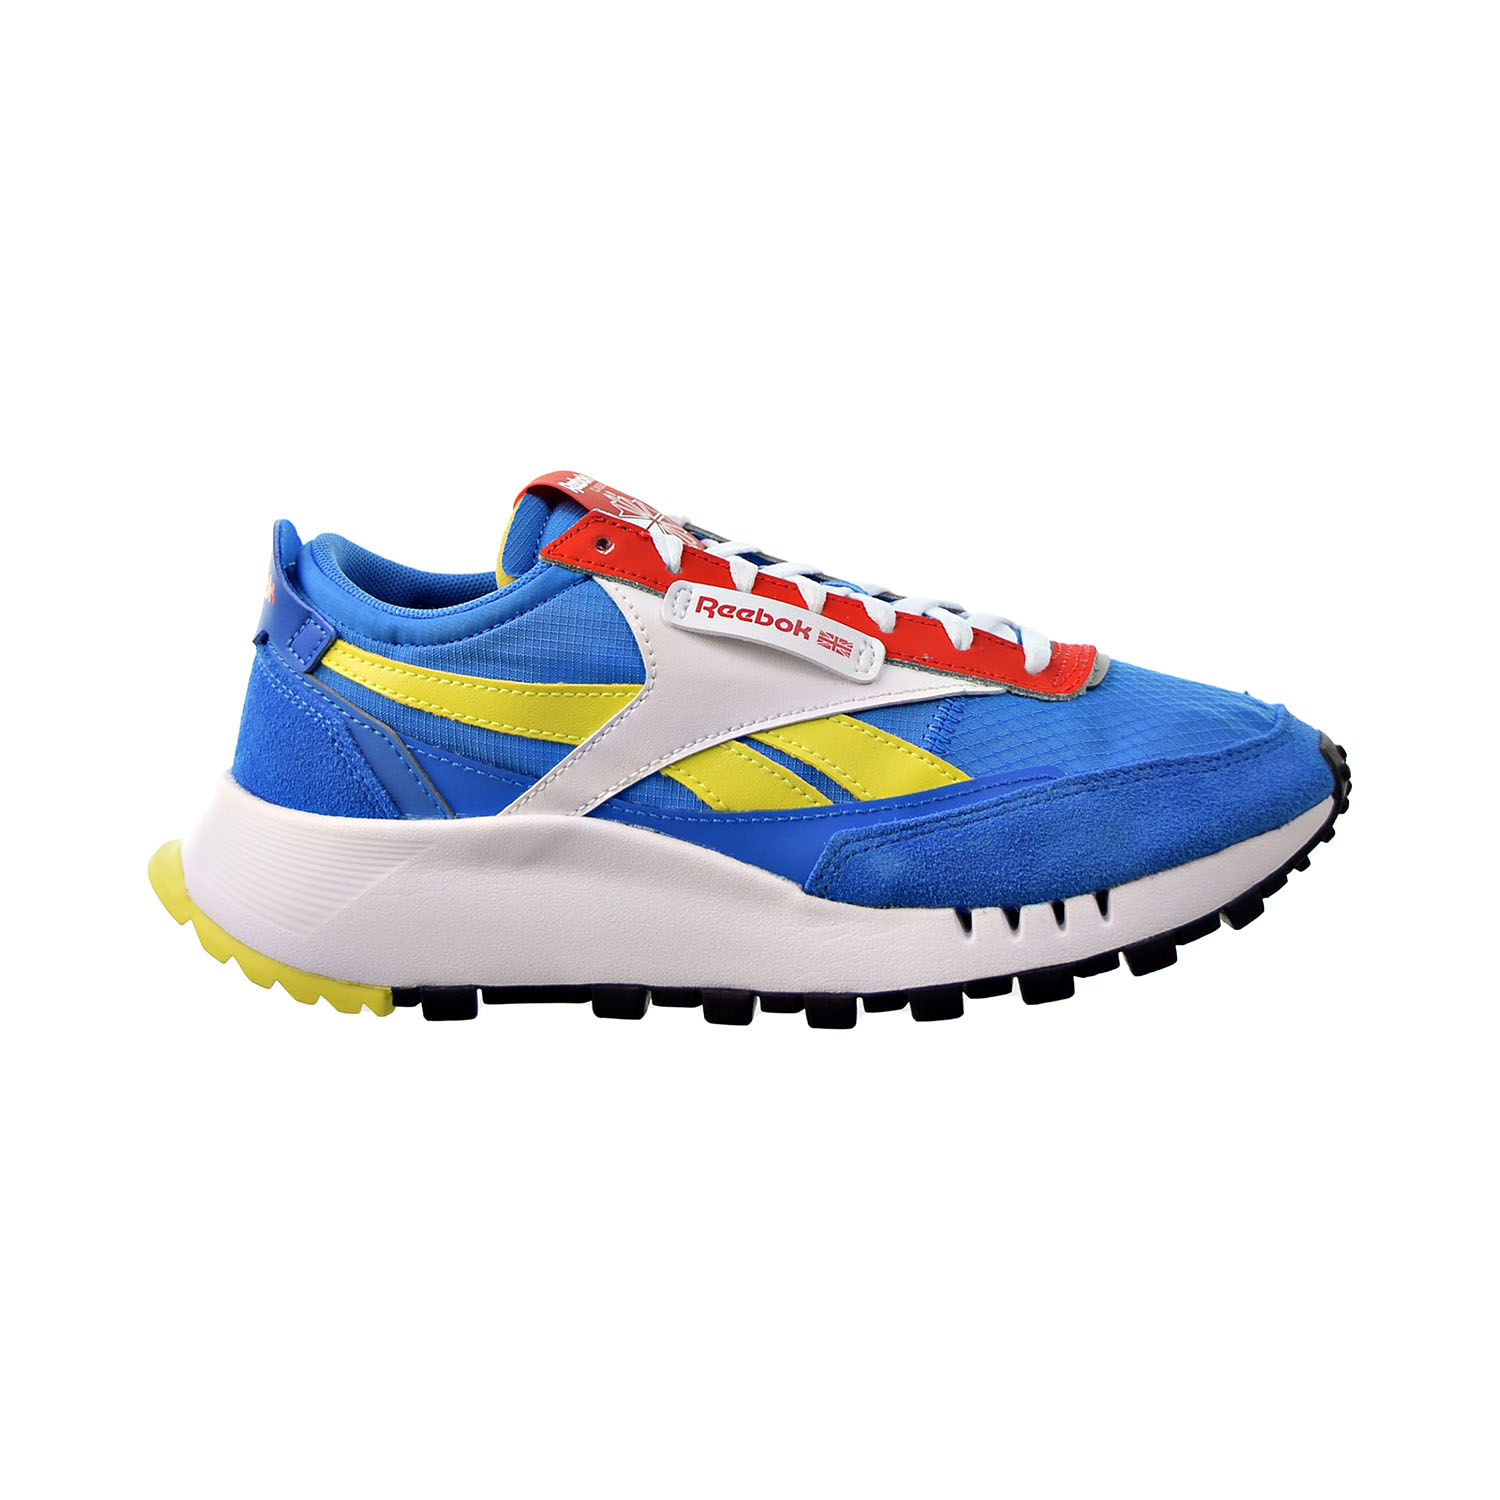 Reebok Classic Leather Legacy Big Kids' Shoes Blue-Blue-Red fy9114 (4 M US)